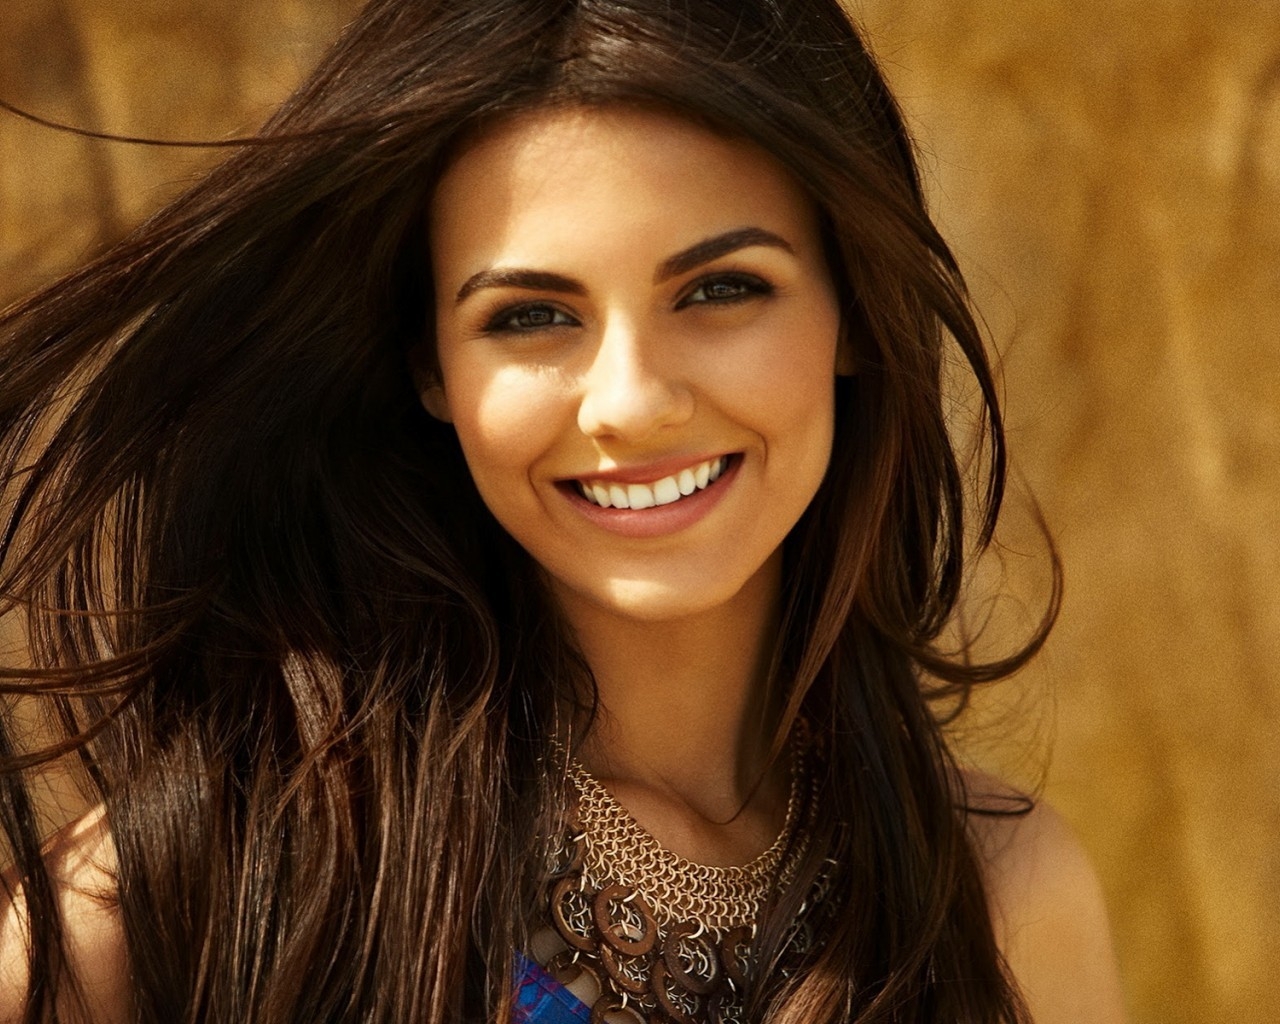 Cute Smile of Victoria Justice for 1280 x 1024 resolution